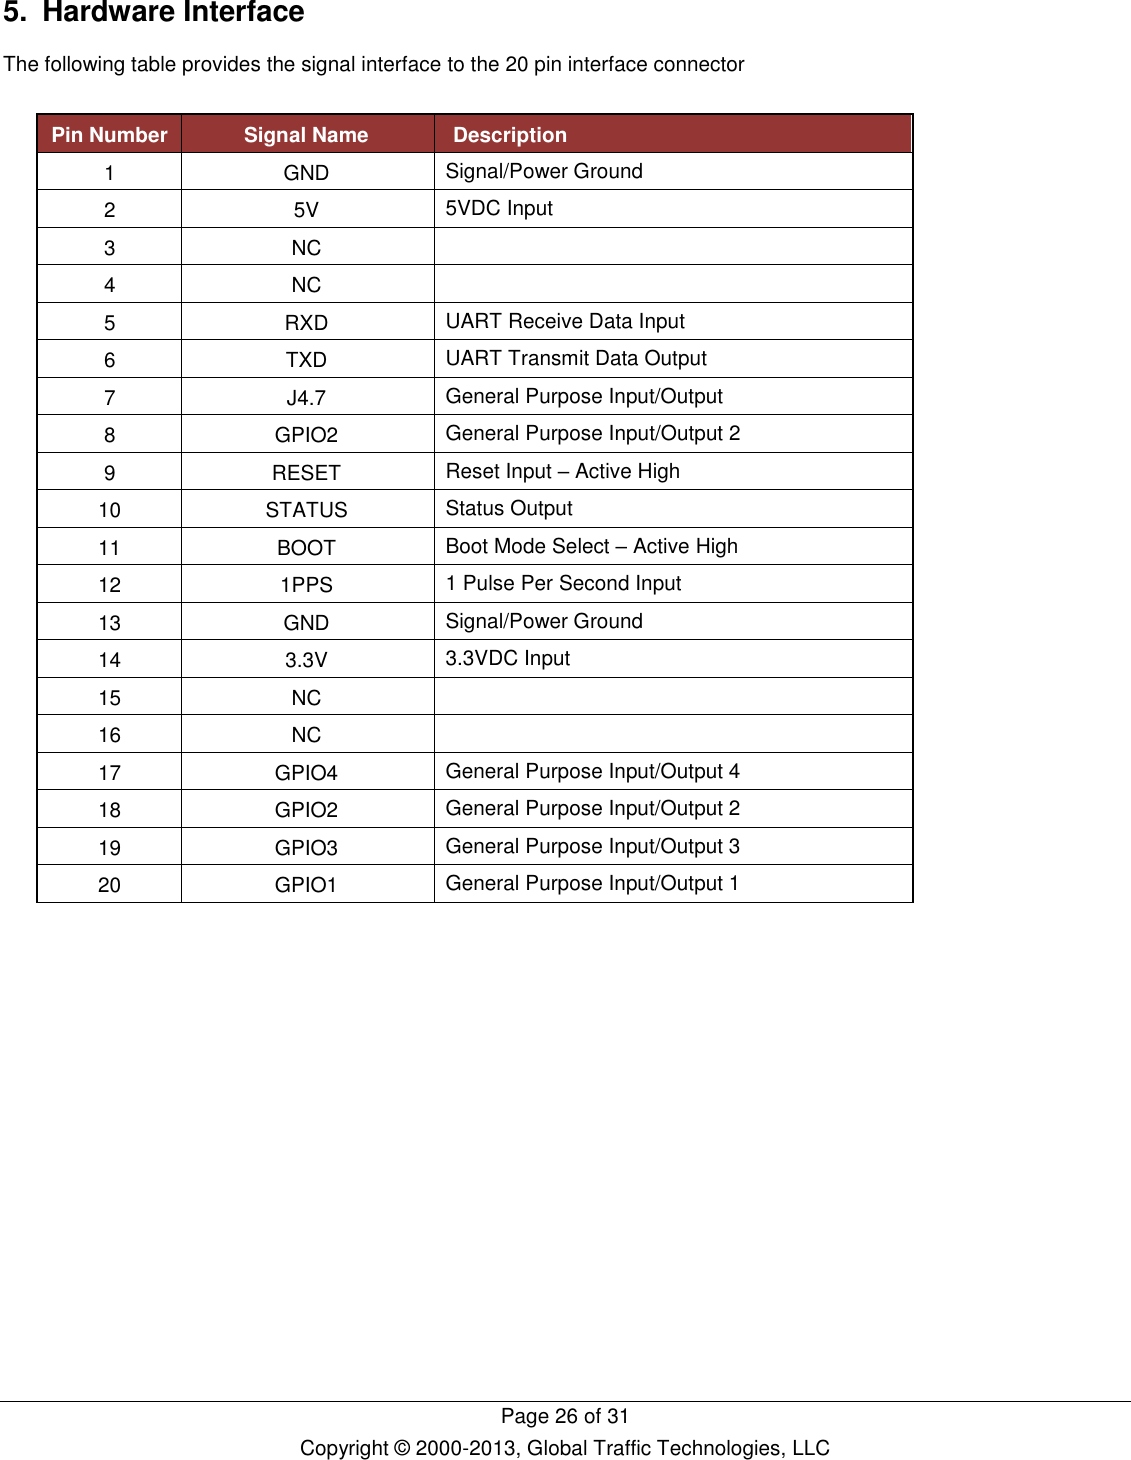   Page 26 of 31 Copyright © 2000-2013, Global Traffic Technologies, LLC 5.  Hardware Interface The following table provides the signal interface to the 20 pin interface connector  Pin Number Signal Name Description 1 GND Signal/Power Ground 2 5V 5VDC Input 3 NC  4 NC  5 RXD UART Receive Data Input 6 TXD UART Transmit Data Output 7 J4.7 General Purpose Input/Output 8 GPIO2 General Purpose Input/Output 2 9 RESET Reset Input – Active High 10 STATUS Status Output 11 BOOT Boot Mode Select – Active High 12 1PPS 1 Pulse Per Second Input 13 GND Signal/Power Ground 14 3.3V 3.3VDC Input 15 NC  16 NC  17 GPIO4 General Purpose Input/Output 4 18 GPIO2 General Purpose Input/Output 2 19 GPIO3 General Purpose Input/Output 3 20 GPIO1 General Purpose Input/Output 1 